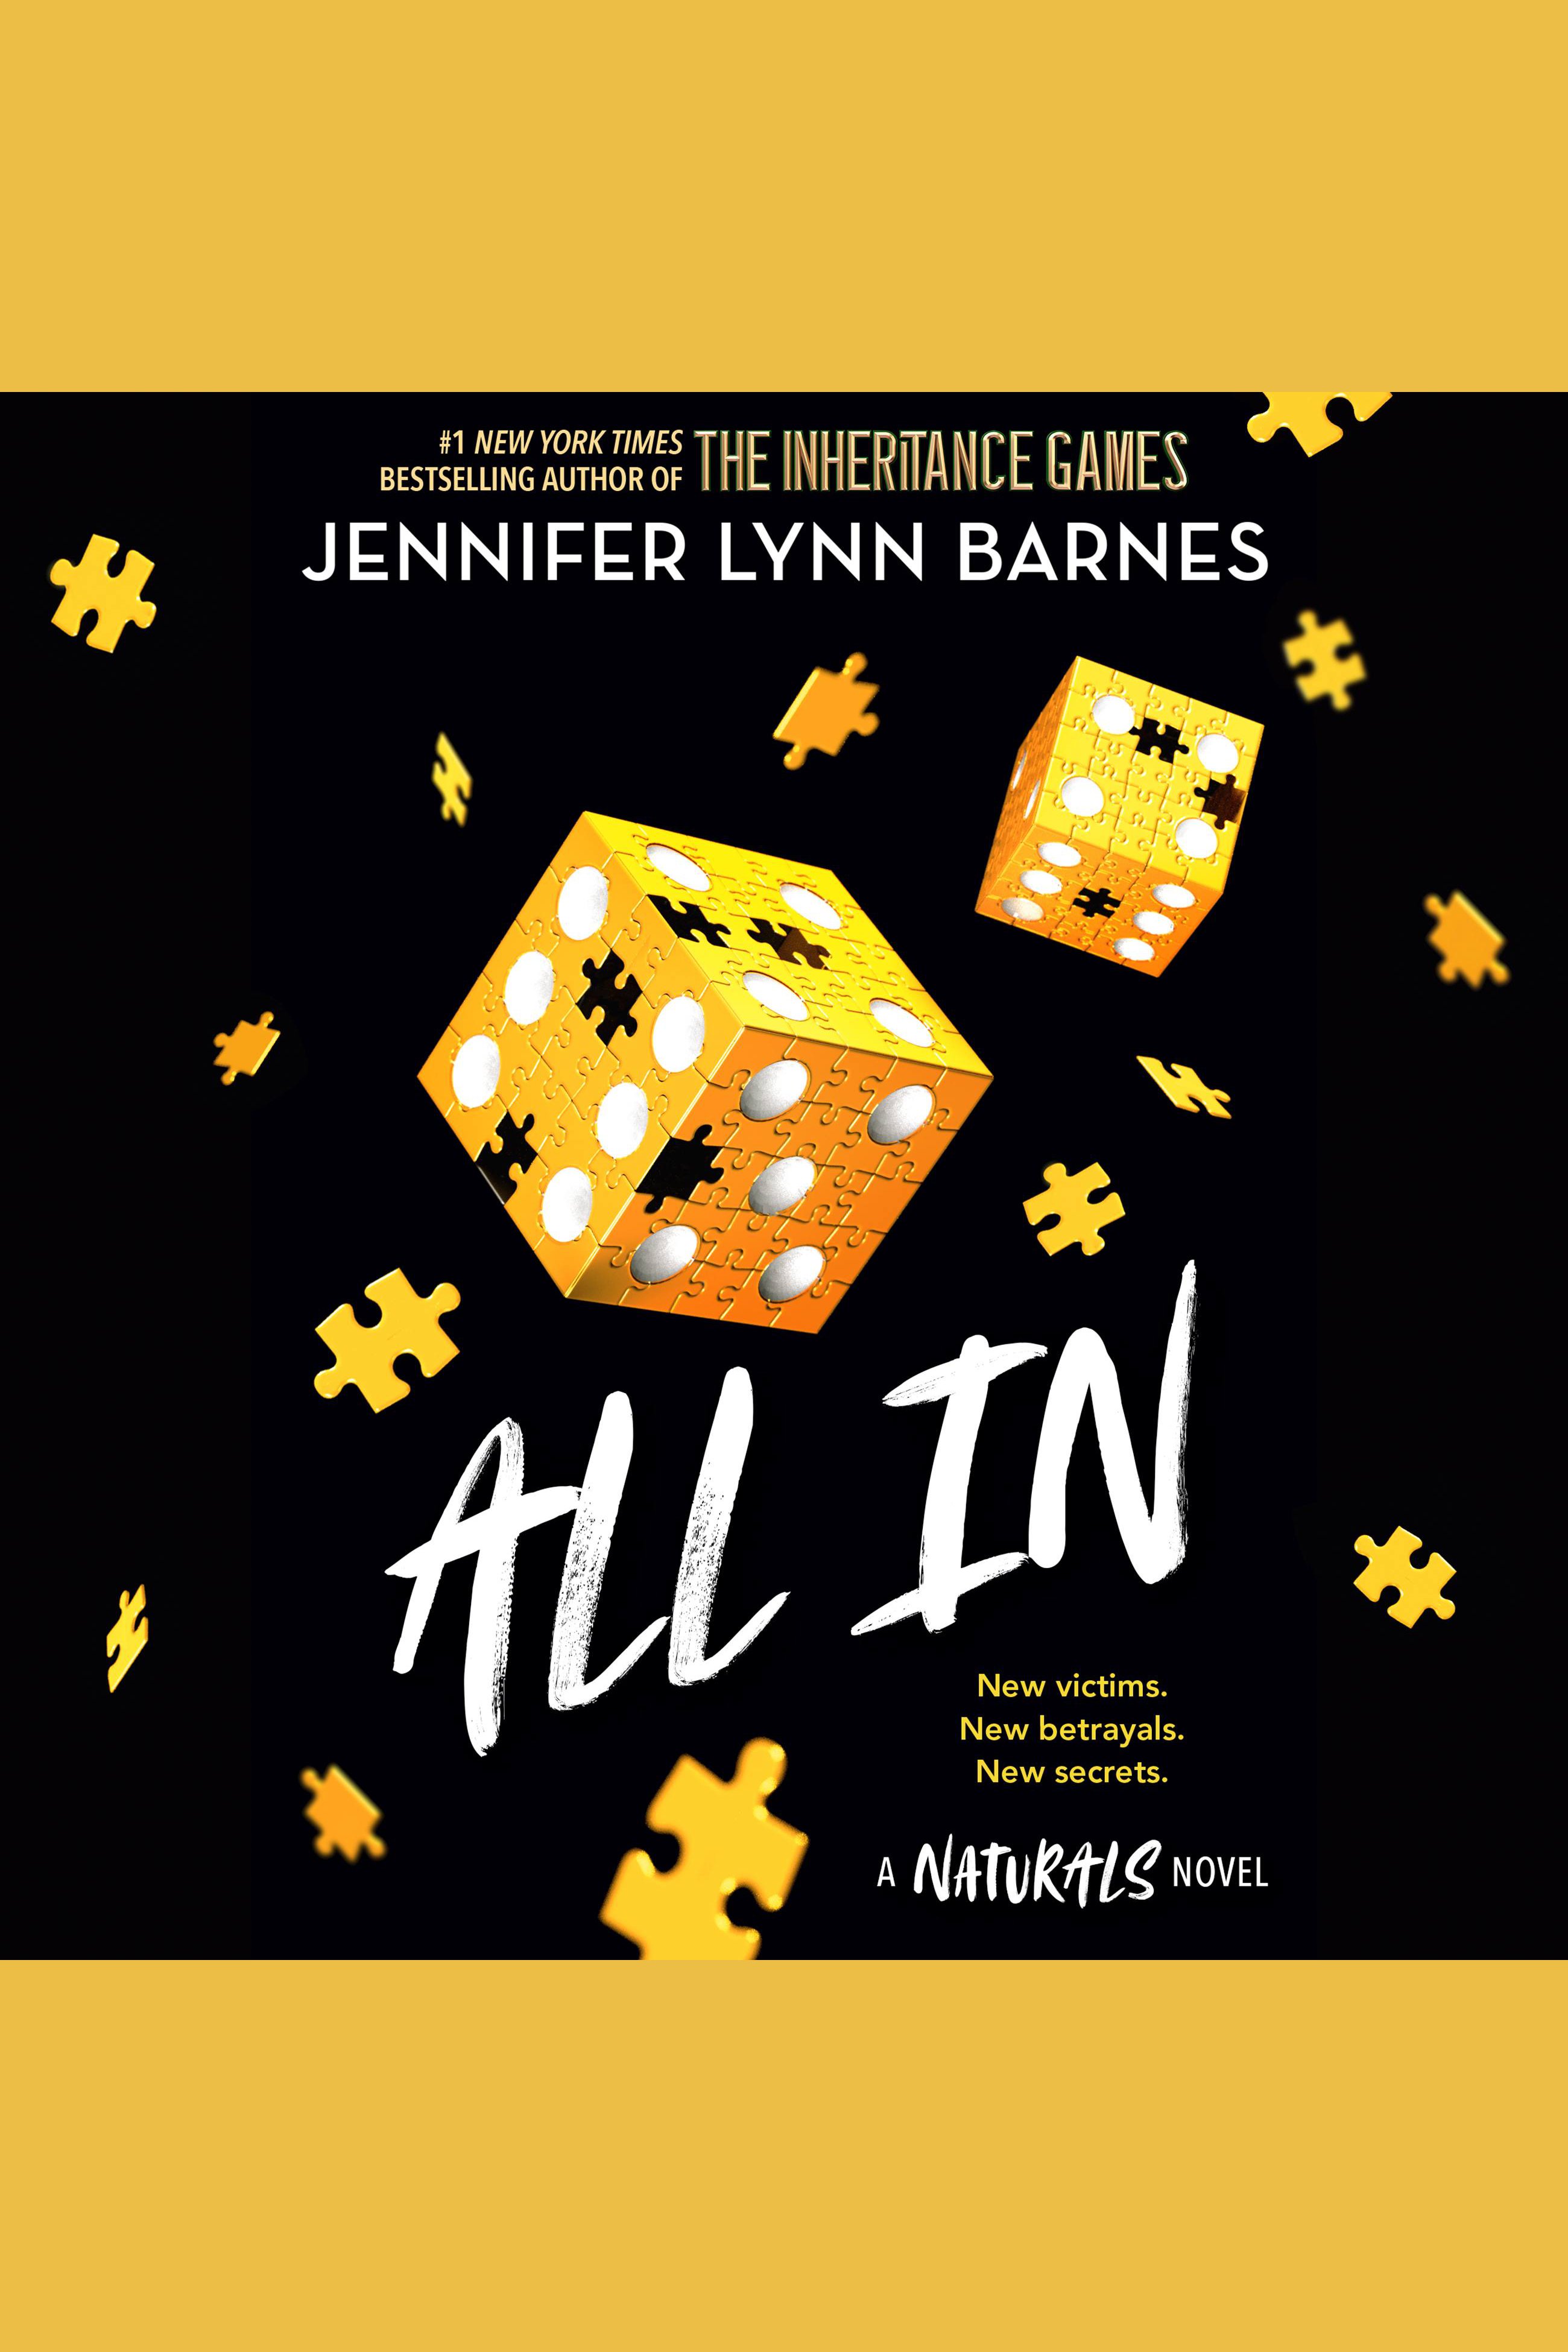 All In cover image